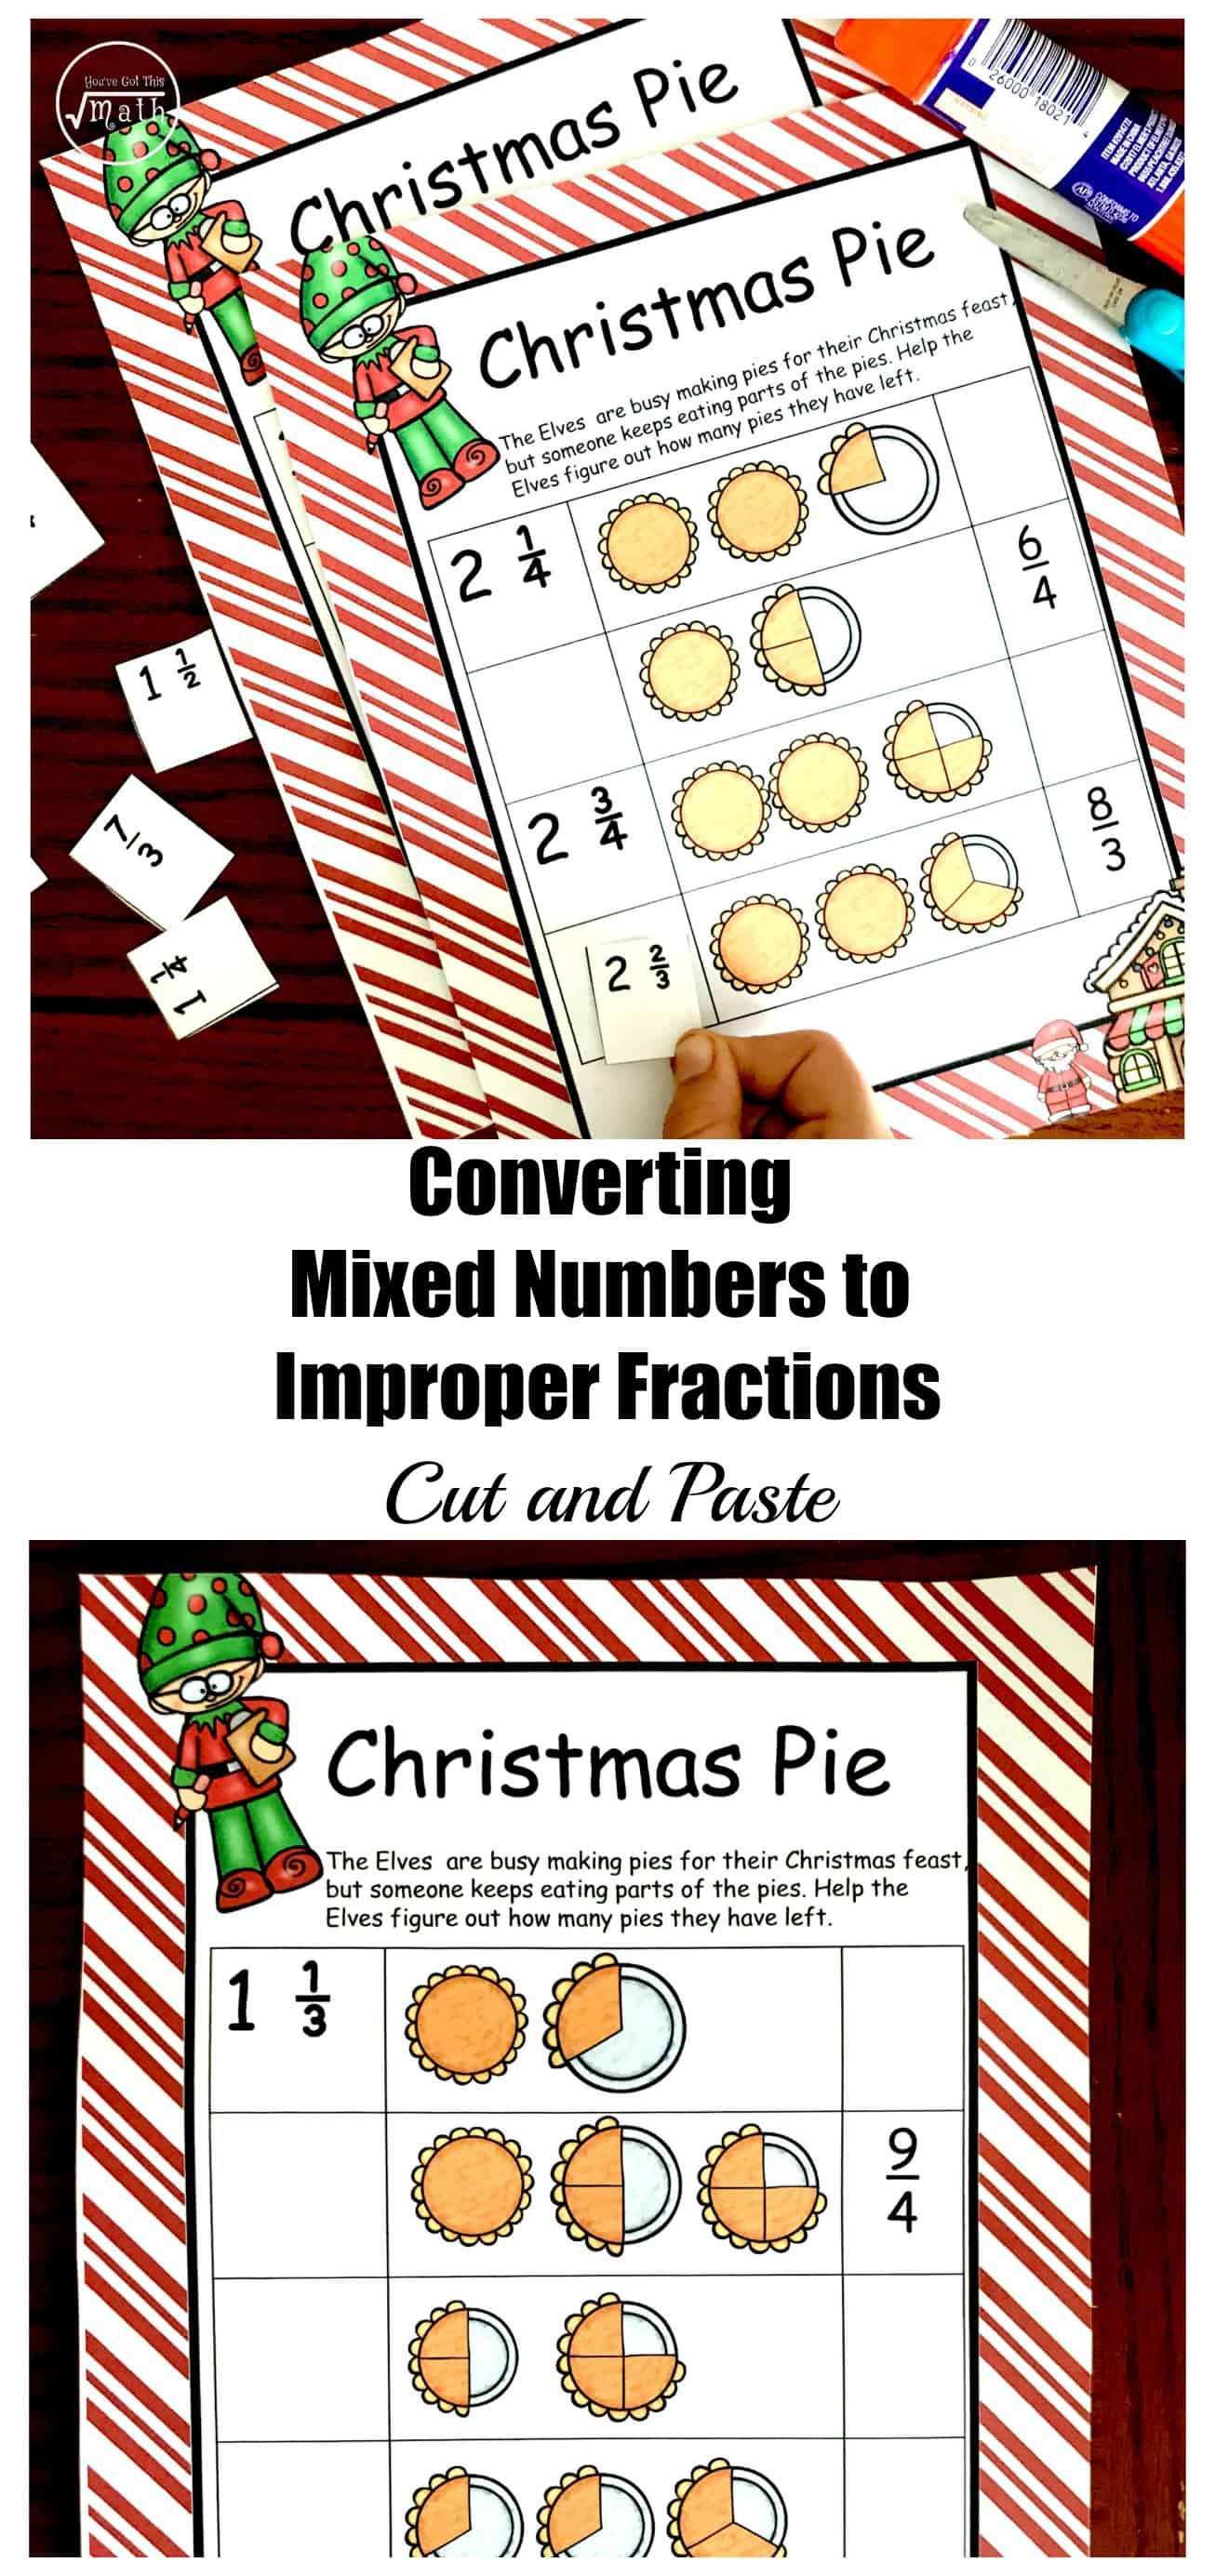 This free Cut and Paste Converting Mixed Numbers To Improper Fractions Worksheet helps children visualize this skill while having fun.